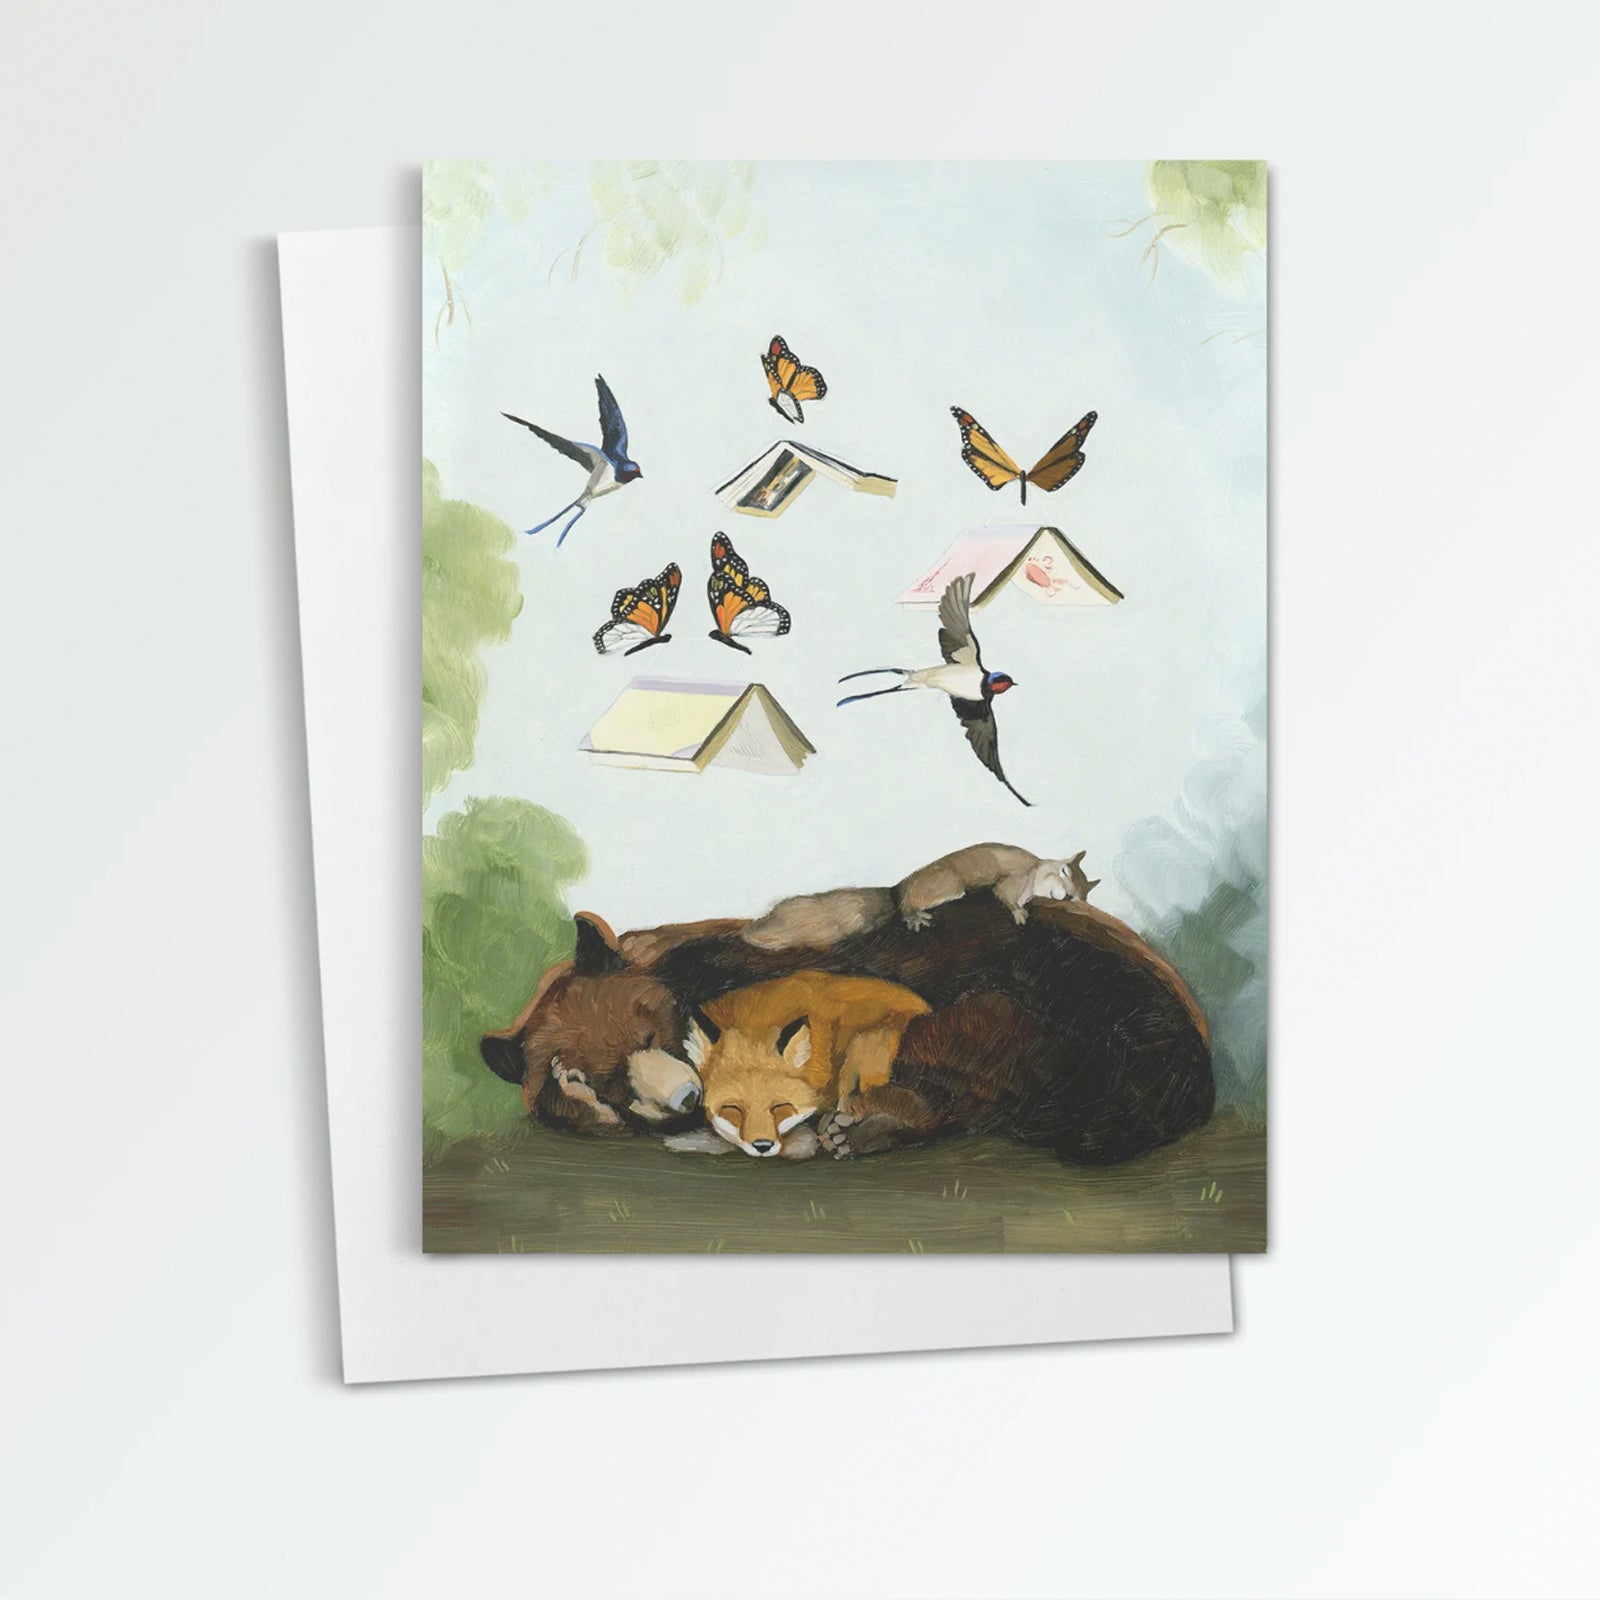 Daydream notecard from Kim Ferreira. A bear, fox and squirrel nap on the ground while birds, butterflies and books float and fly above them.